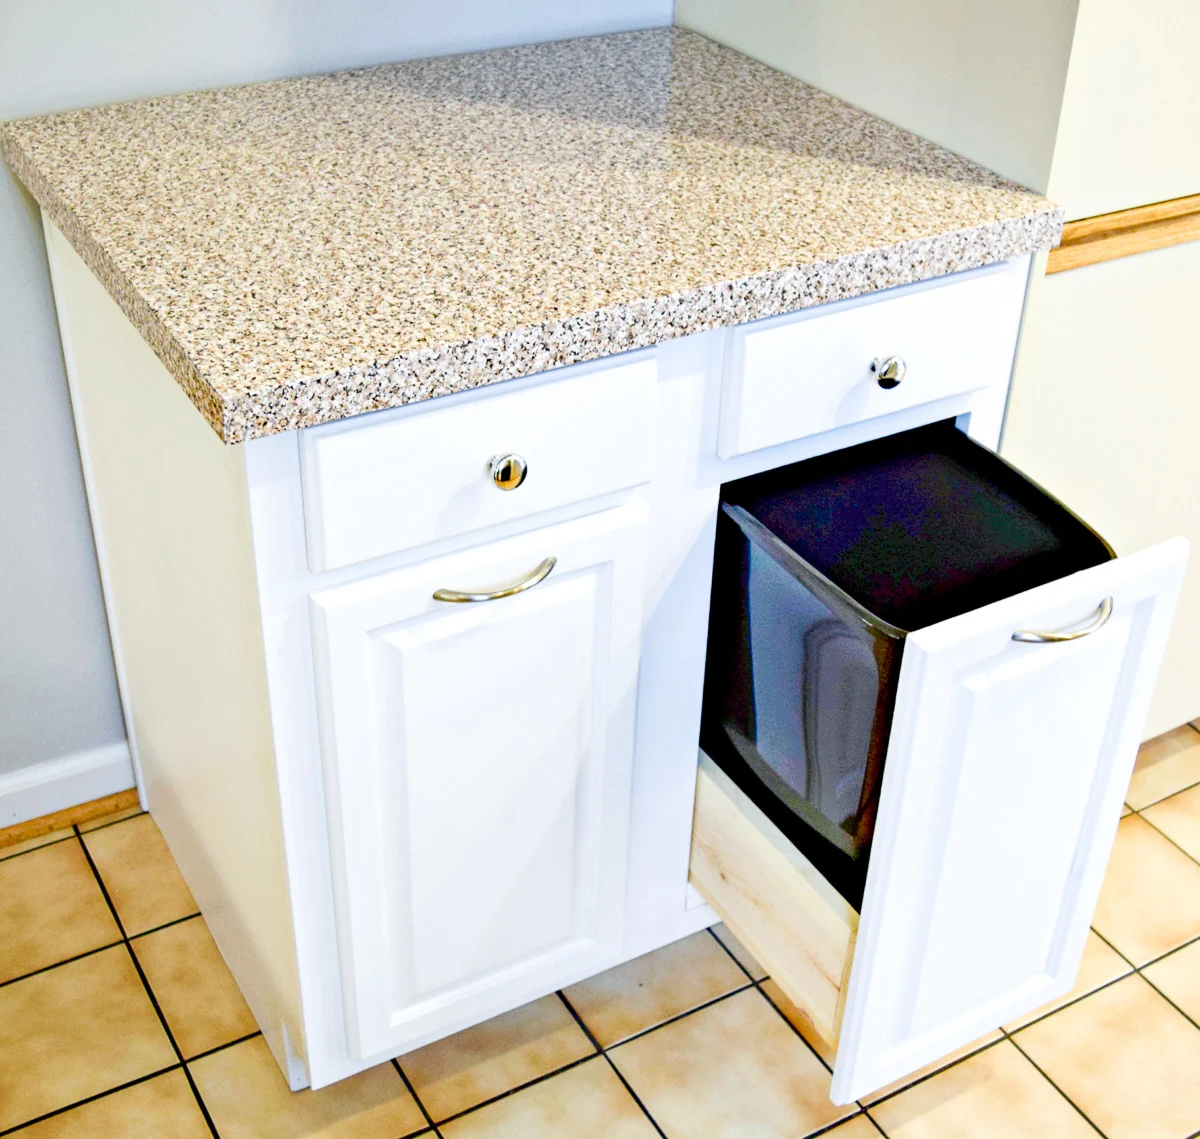 Where to Find Used Kitchen Cabinets and How to Fix Them Up